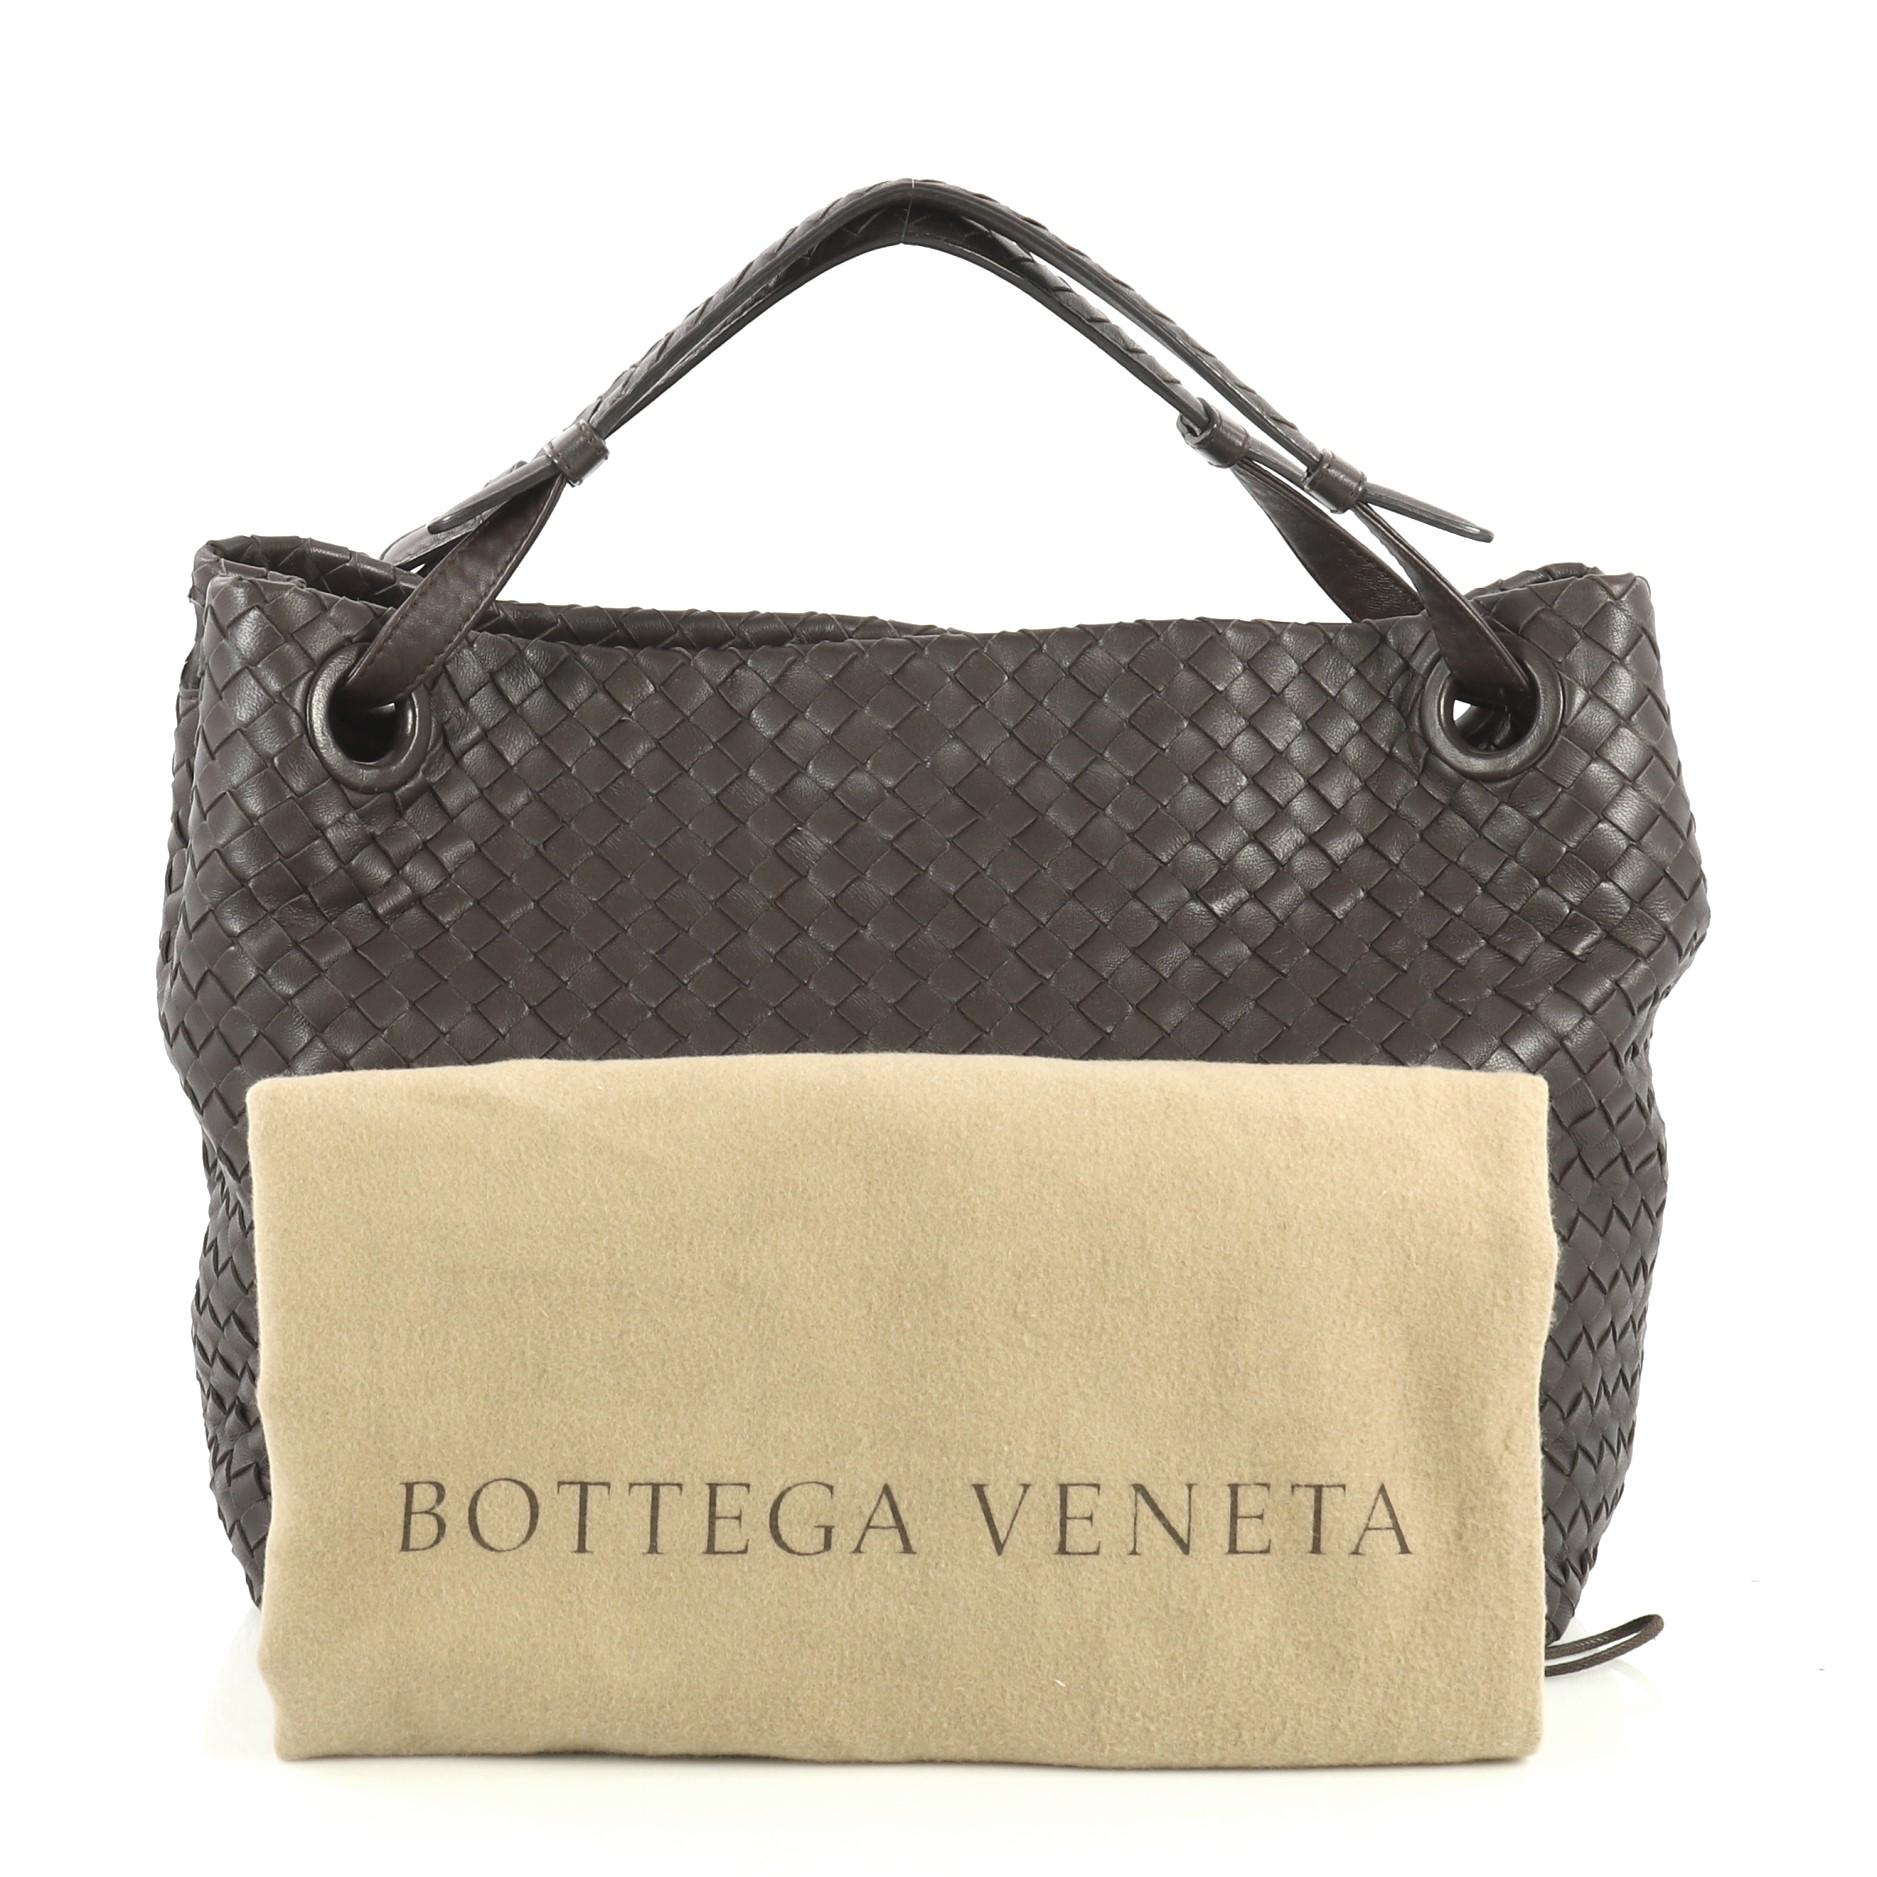 This Bottega Veneta Bella Tote Intrecciato Nappa Large, crafted from brown intrecciato nappa leather, features dual looped handles with braided details and gunmetal-tone hardware. It opens to a neutral suede interior with zip and slip pockets.